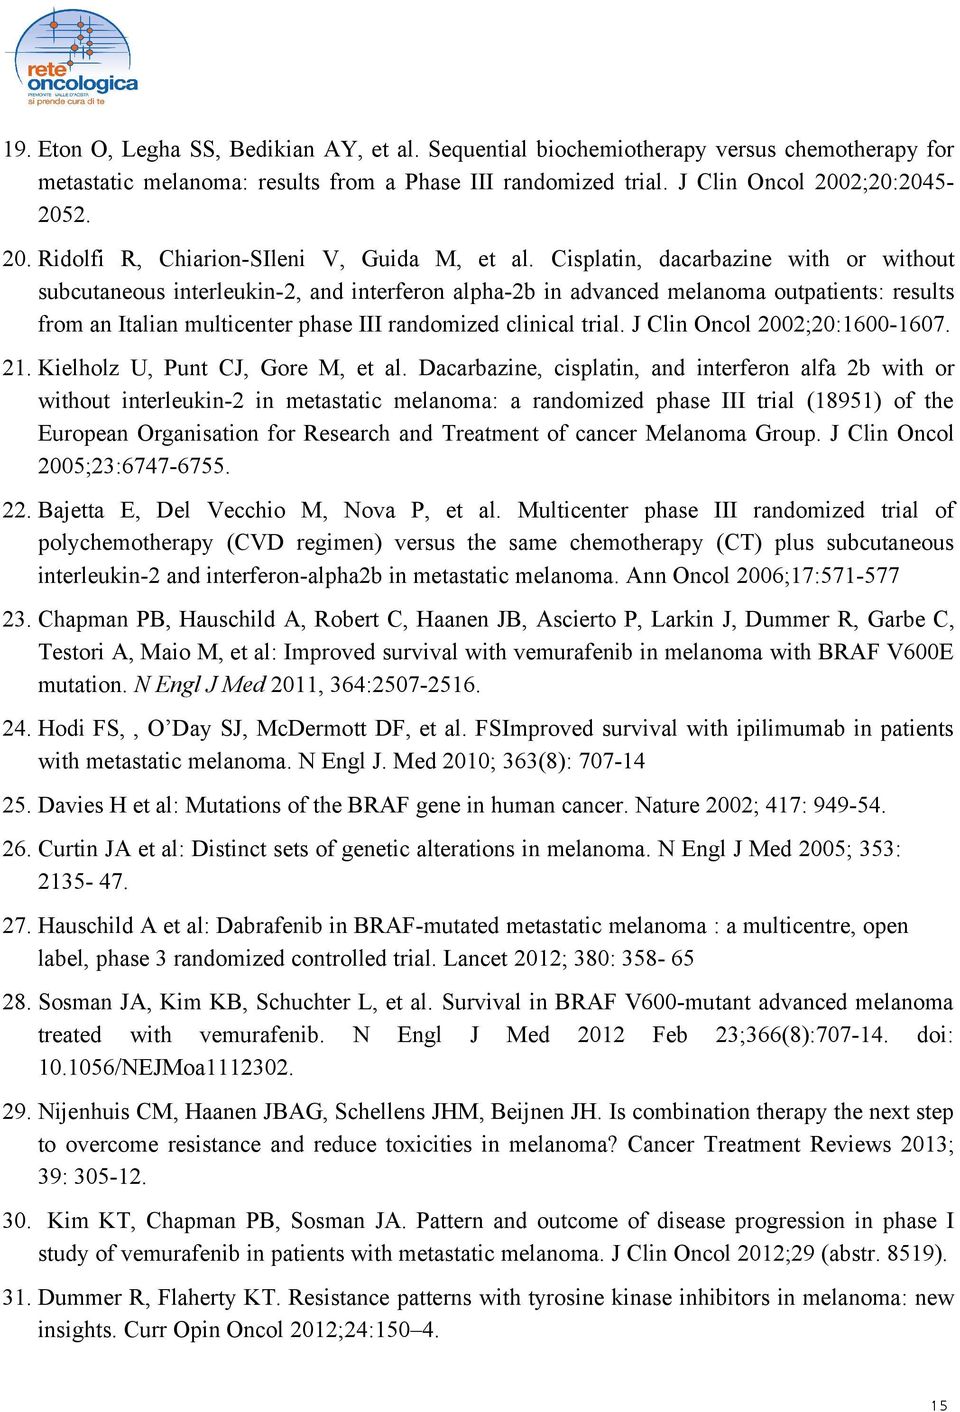 Cisplatin, dacarbazine with or without subcutaneous interleukin-2, and interferon alpha-2b in advanced melanoma outpatients: results from an Italian multicenter phase III randomized clinical trial.